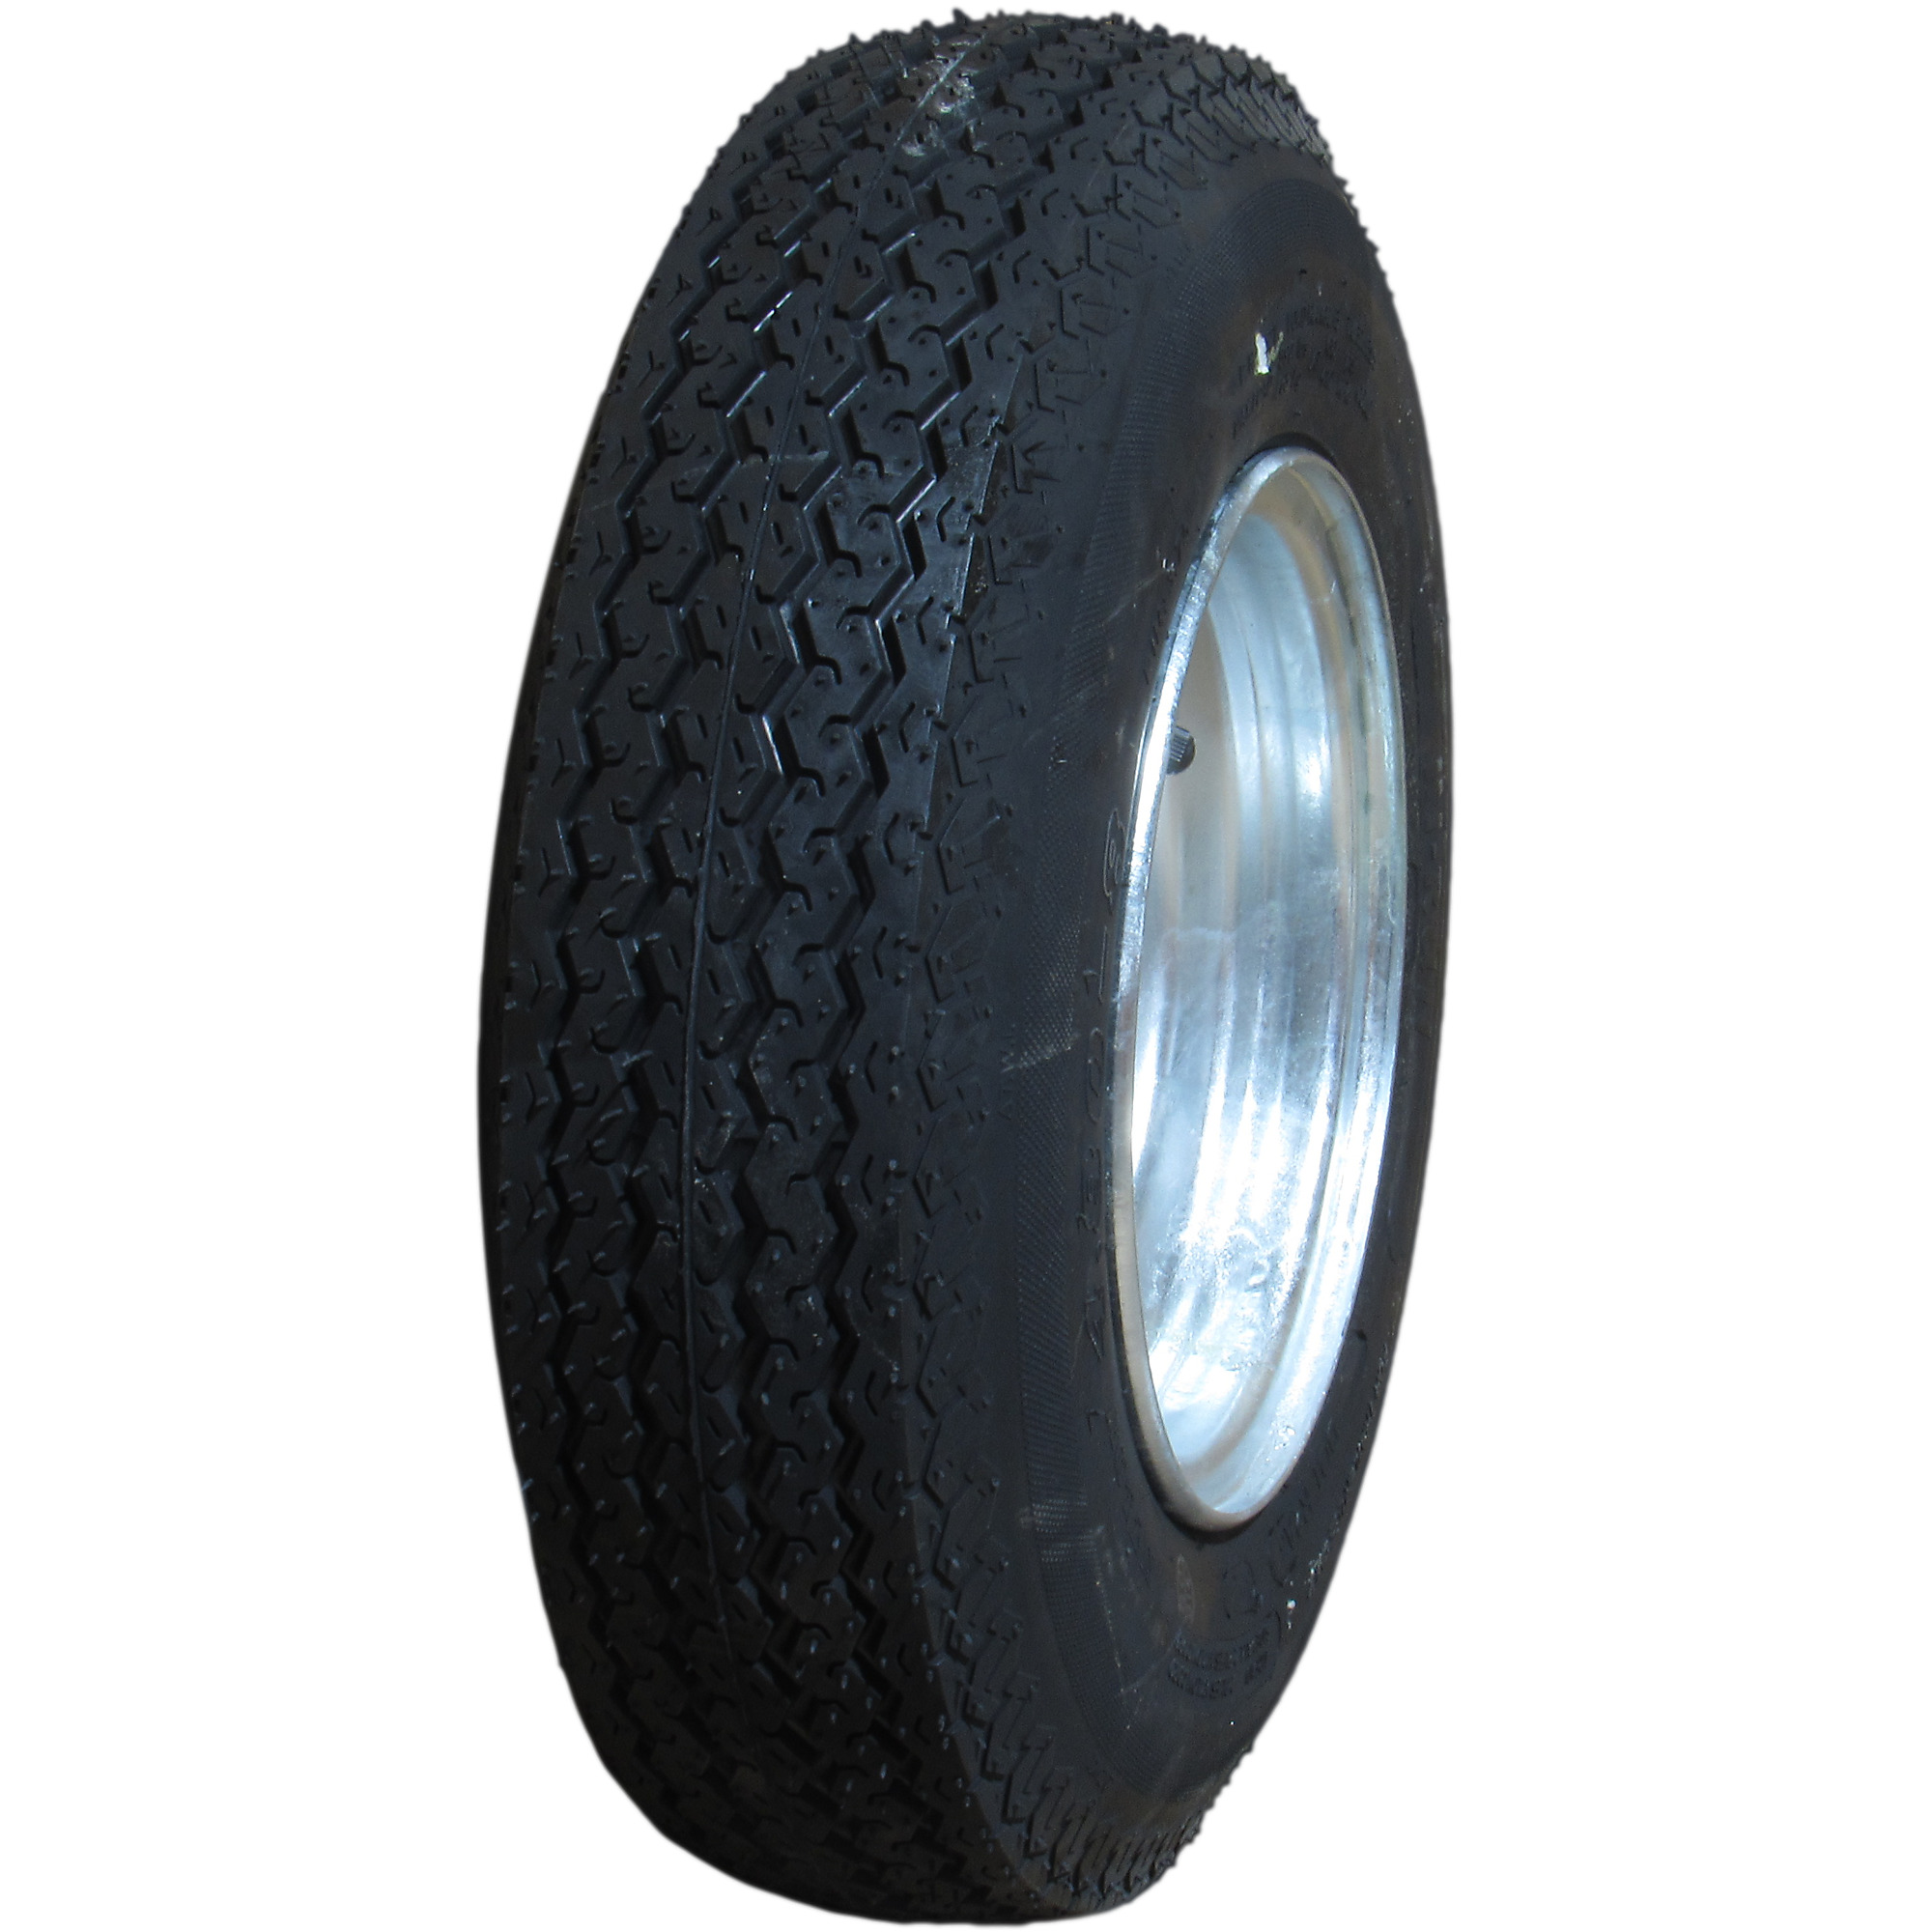 HI-RUN, Highway Trailer Tire Assembly, Galvanized, Tire Size 4.80-8 Load Range Rating B, Bolt Holes (qty.) 5 Model ASB1059